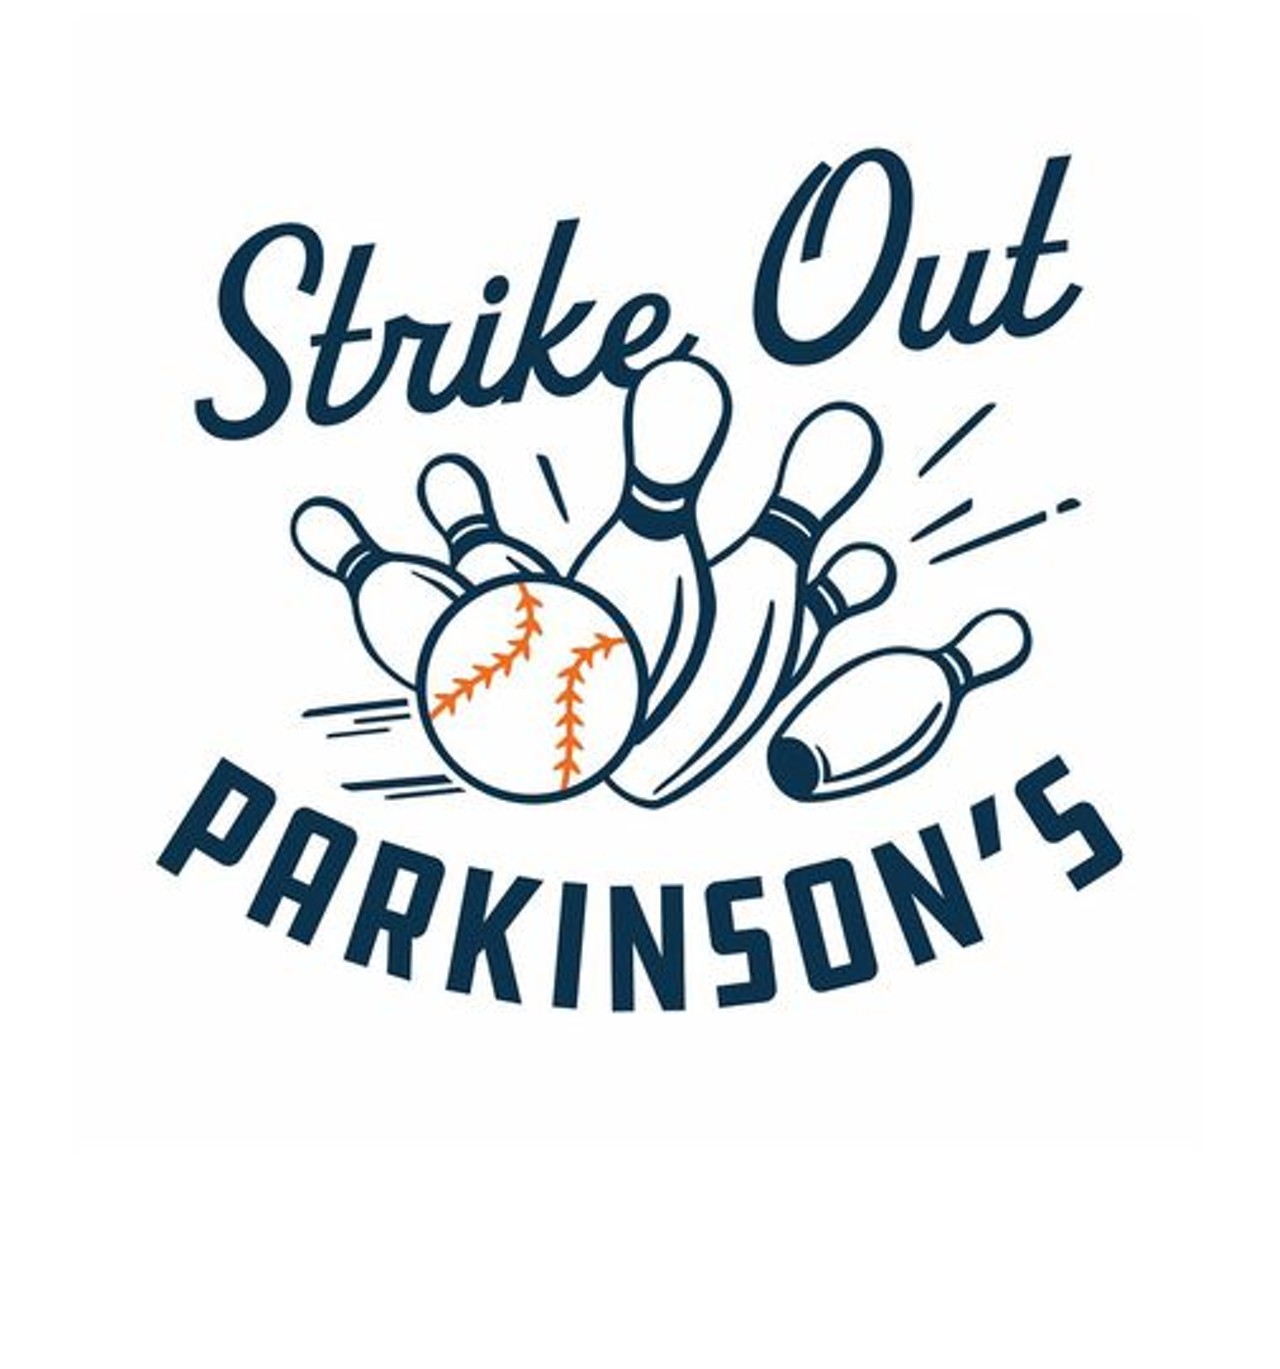 Aug 20 - Kirk Gibson to Host Strike Out Parkinson's Event at Bowlero Lanes  in Royal Oak - Oakland County Times